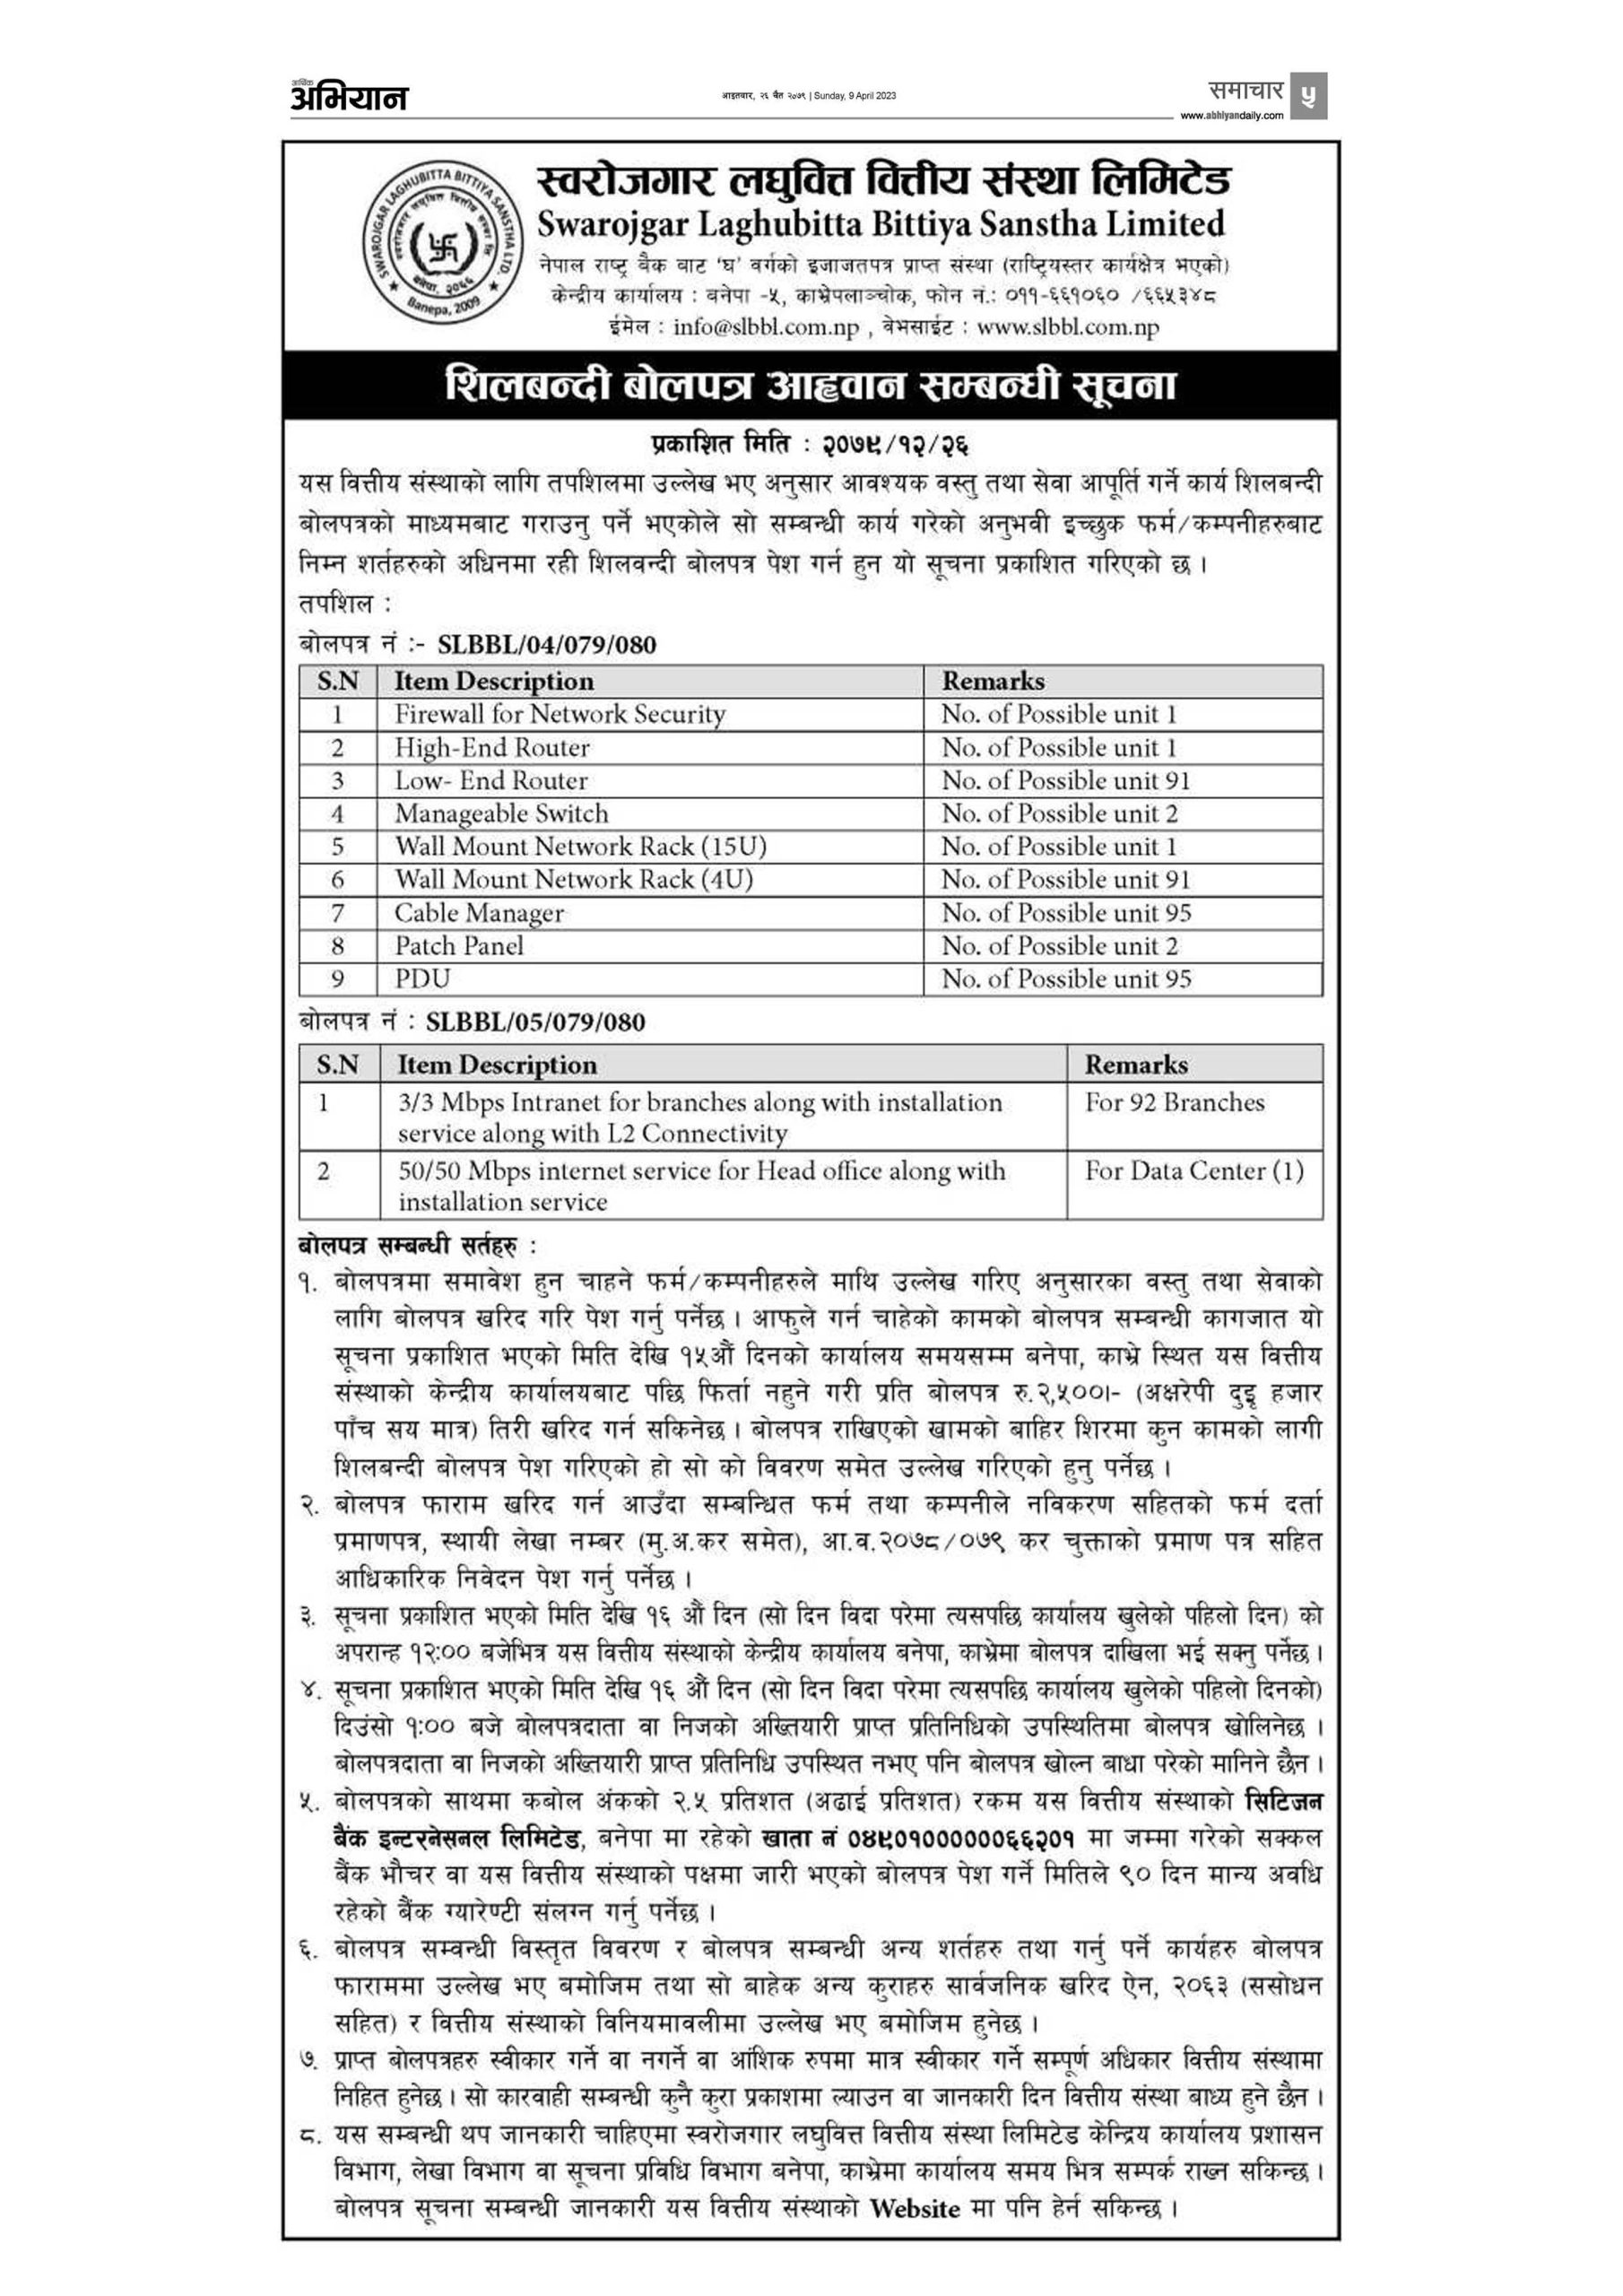 Tender Notice for Intranet, Internet, Firewall for Network Security Dated 2079.12.26